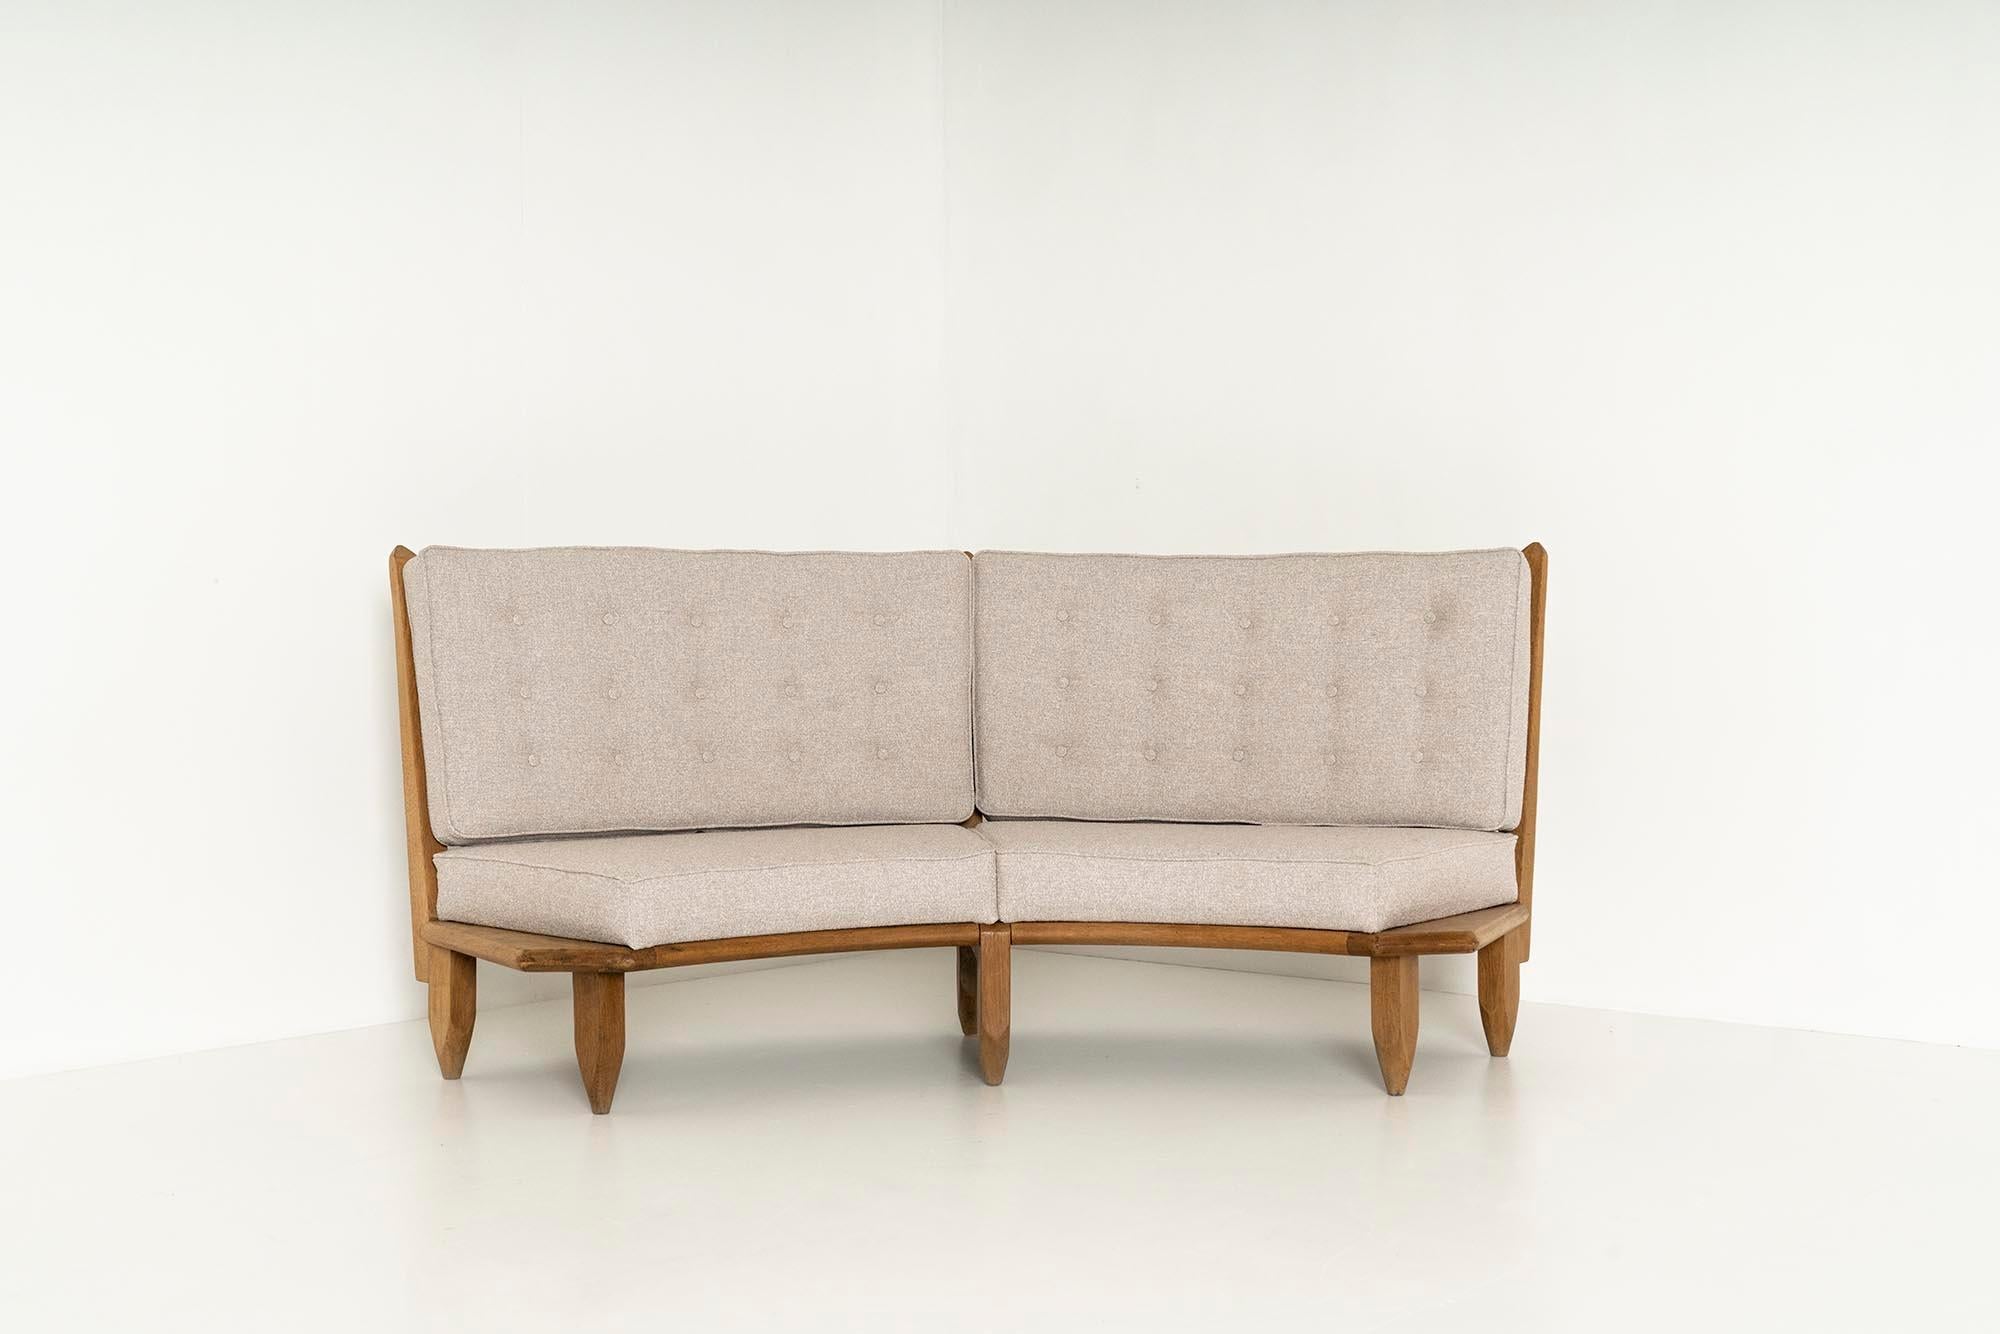 Amazing French half round sofa by the famous duo Guillerme et Chambron from the 1960s. Guillerme et Chambron represent a significant moment in French mid-century design history. The frame of the sofa is slightly rounded and made of oak wood. The